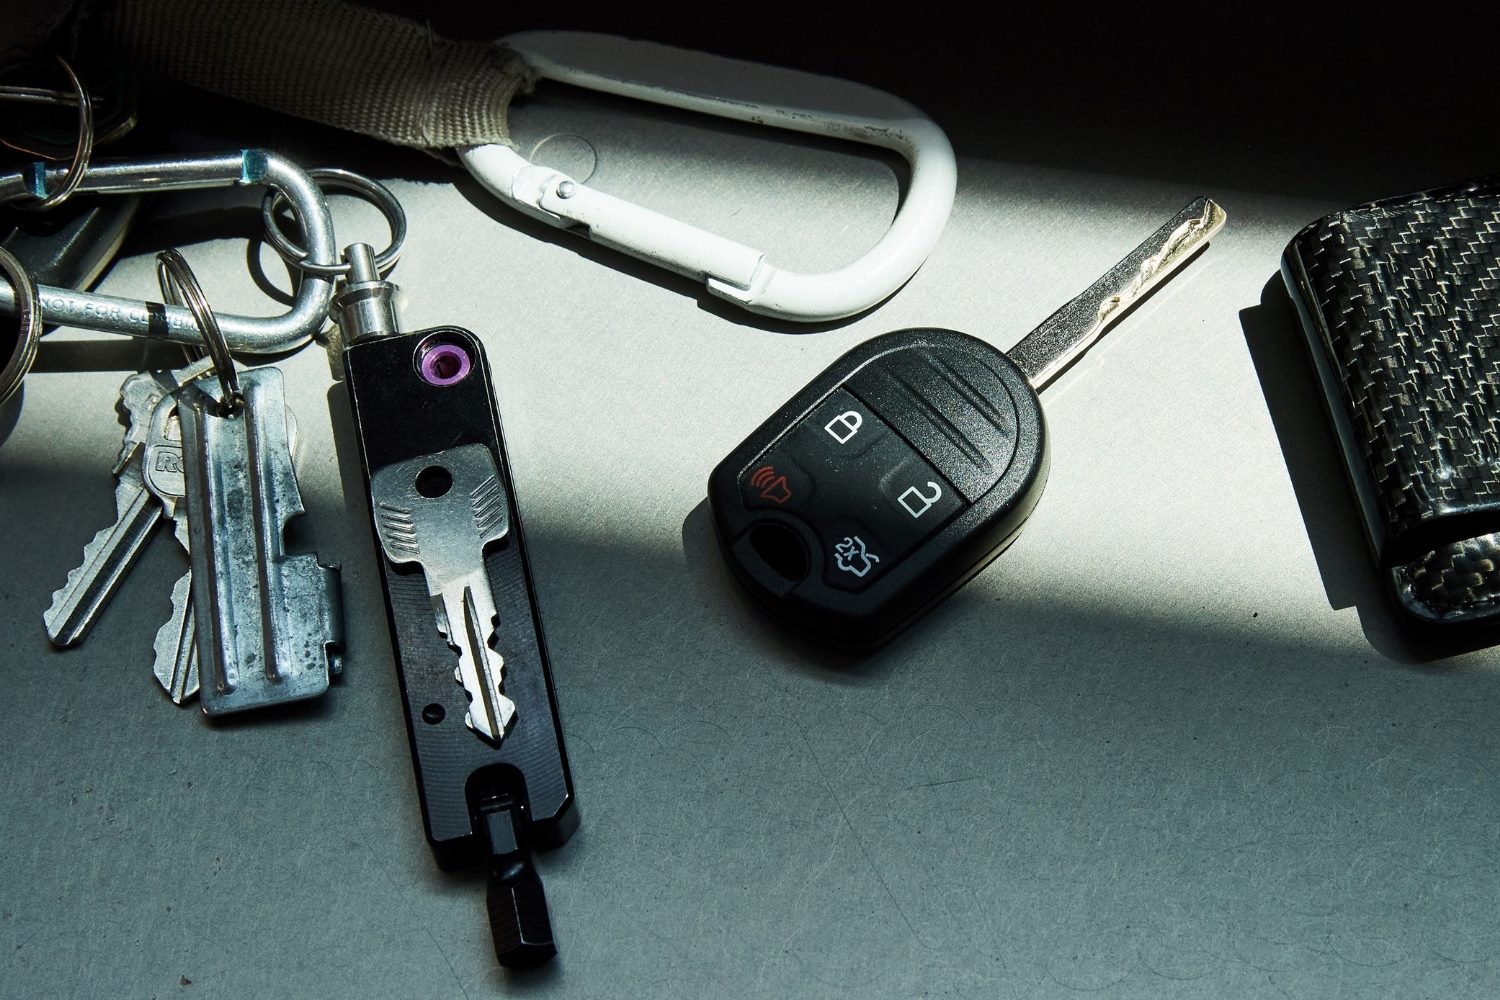 Unlock The Secret: How To Cut A Car Key From The VIN Without The Car